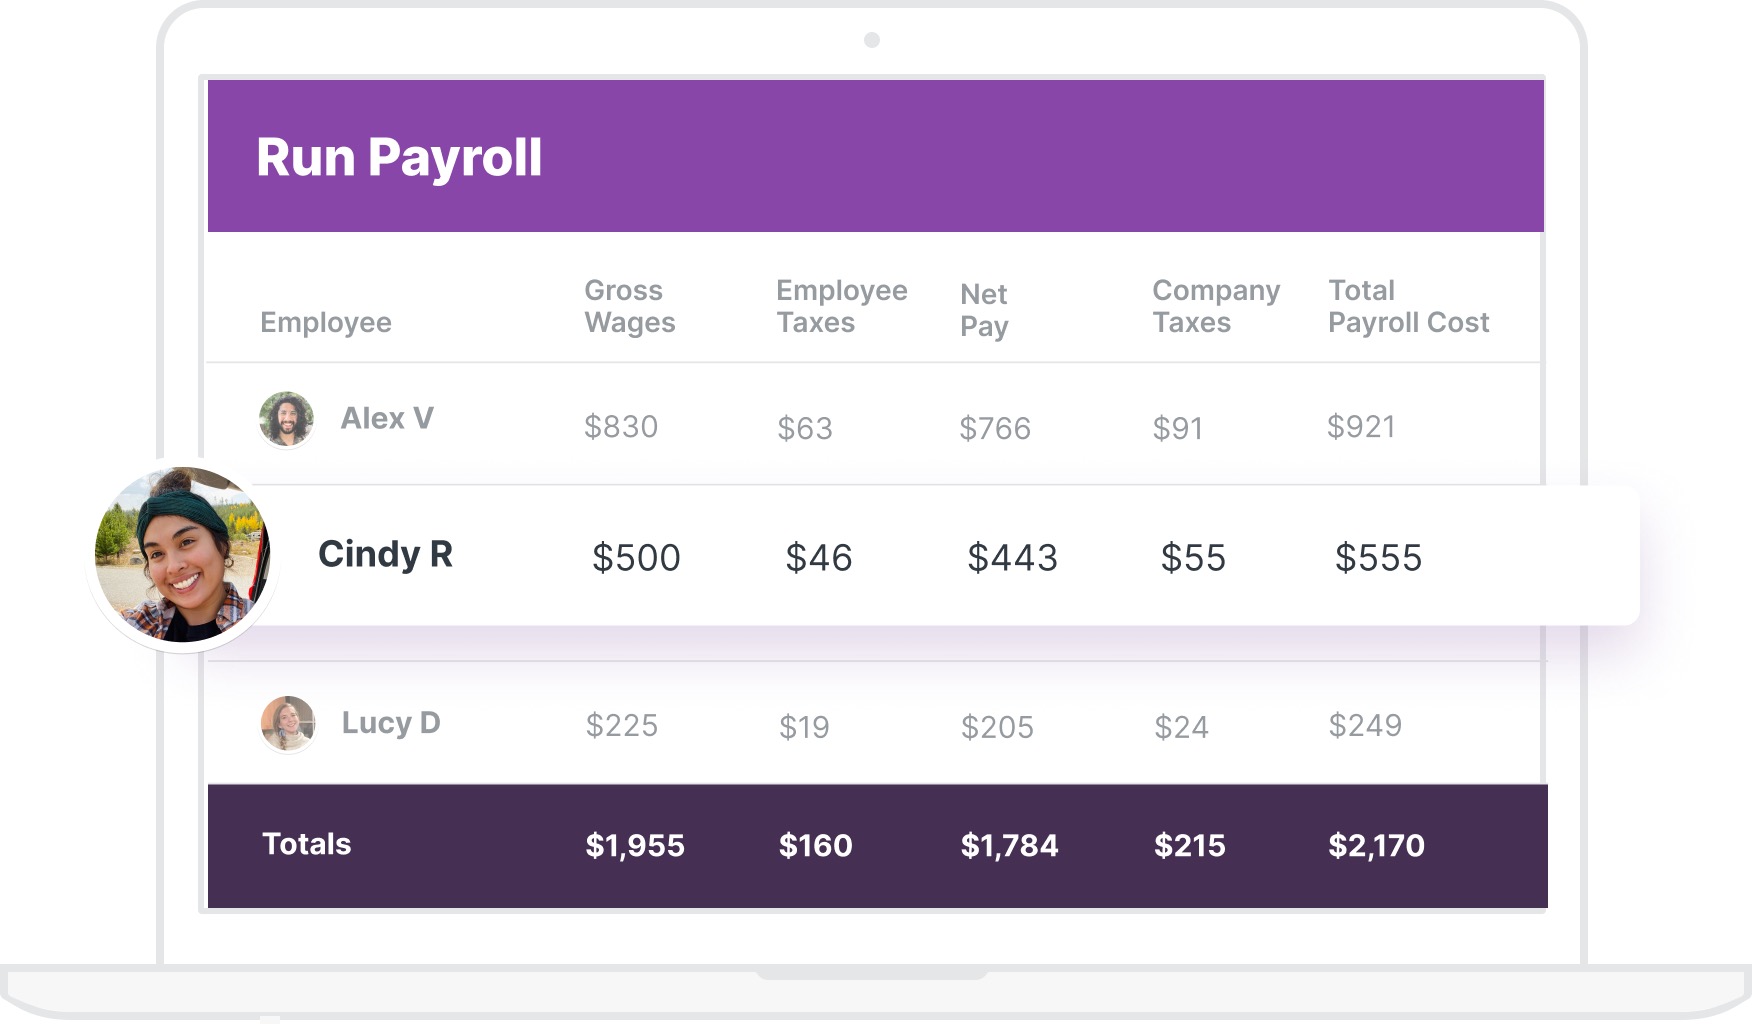 The Homebase payroll interface showing an employee’s gross wages, employee taxes, net pay, company taxes, and total payroll cost.